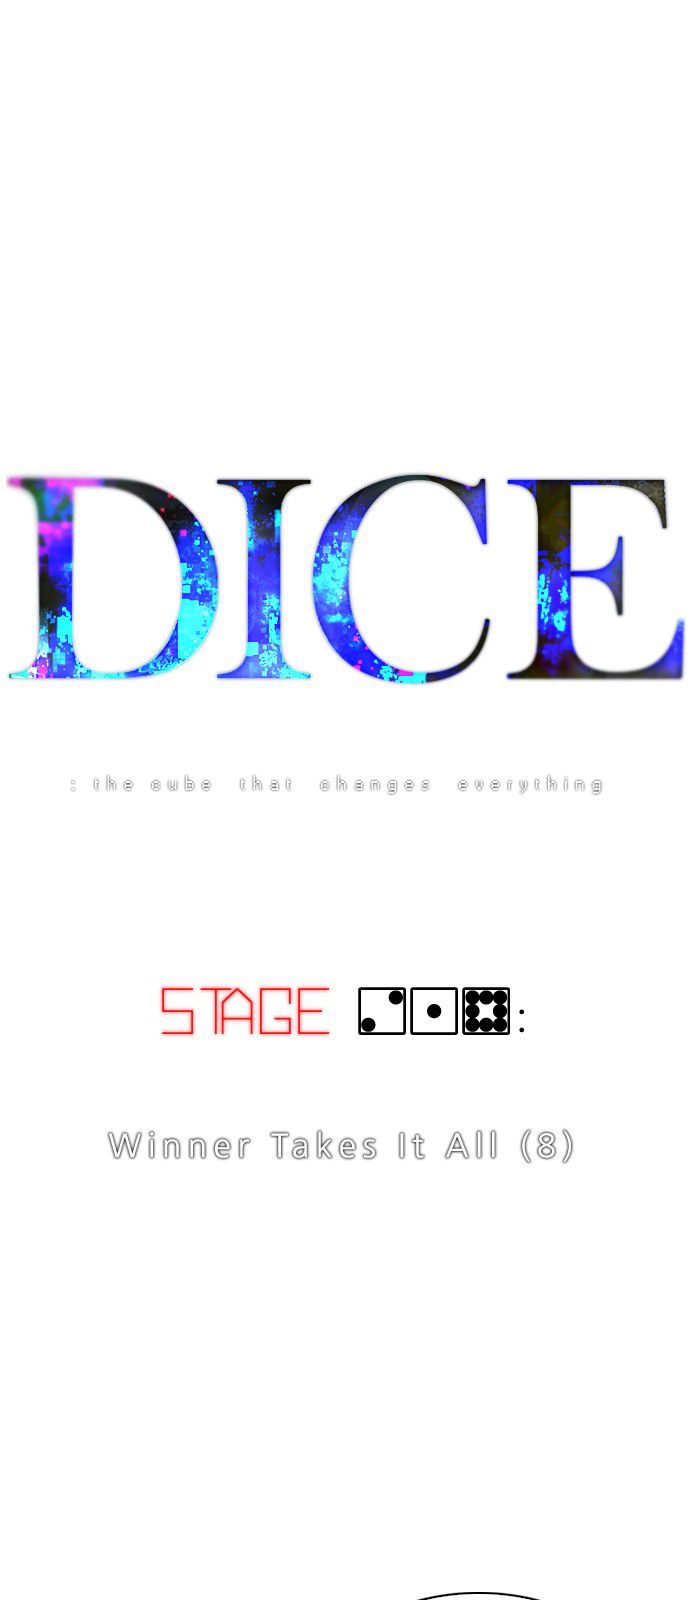 DICE: The Cube that Changes Everything 218